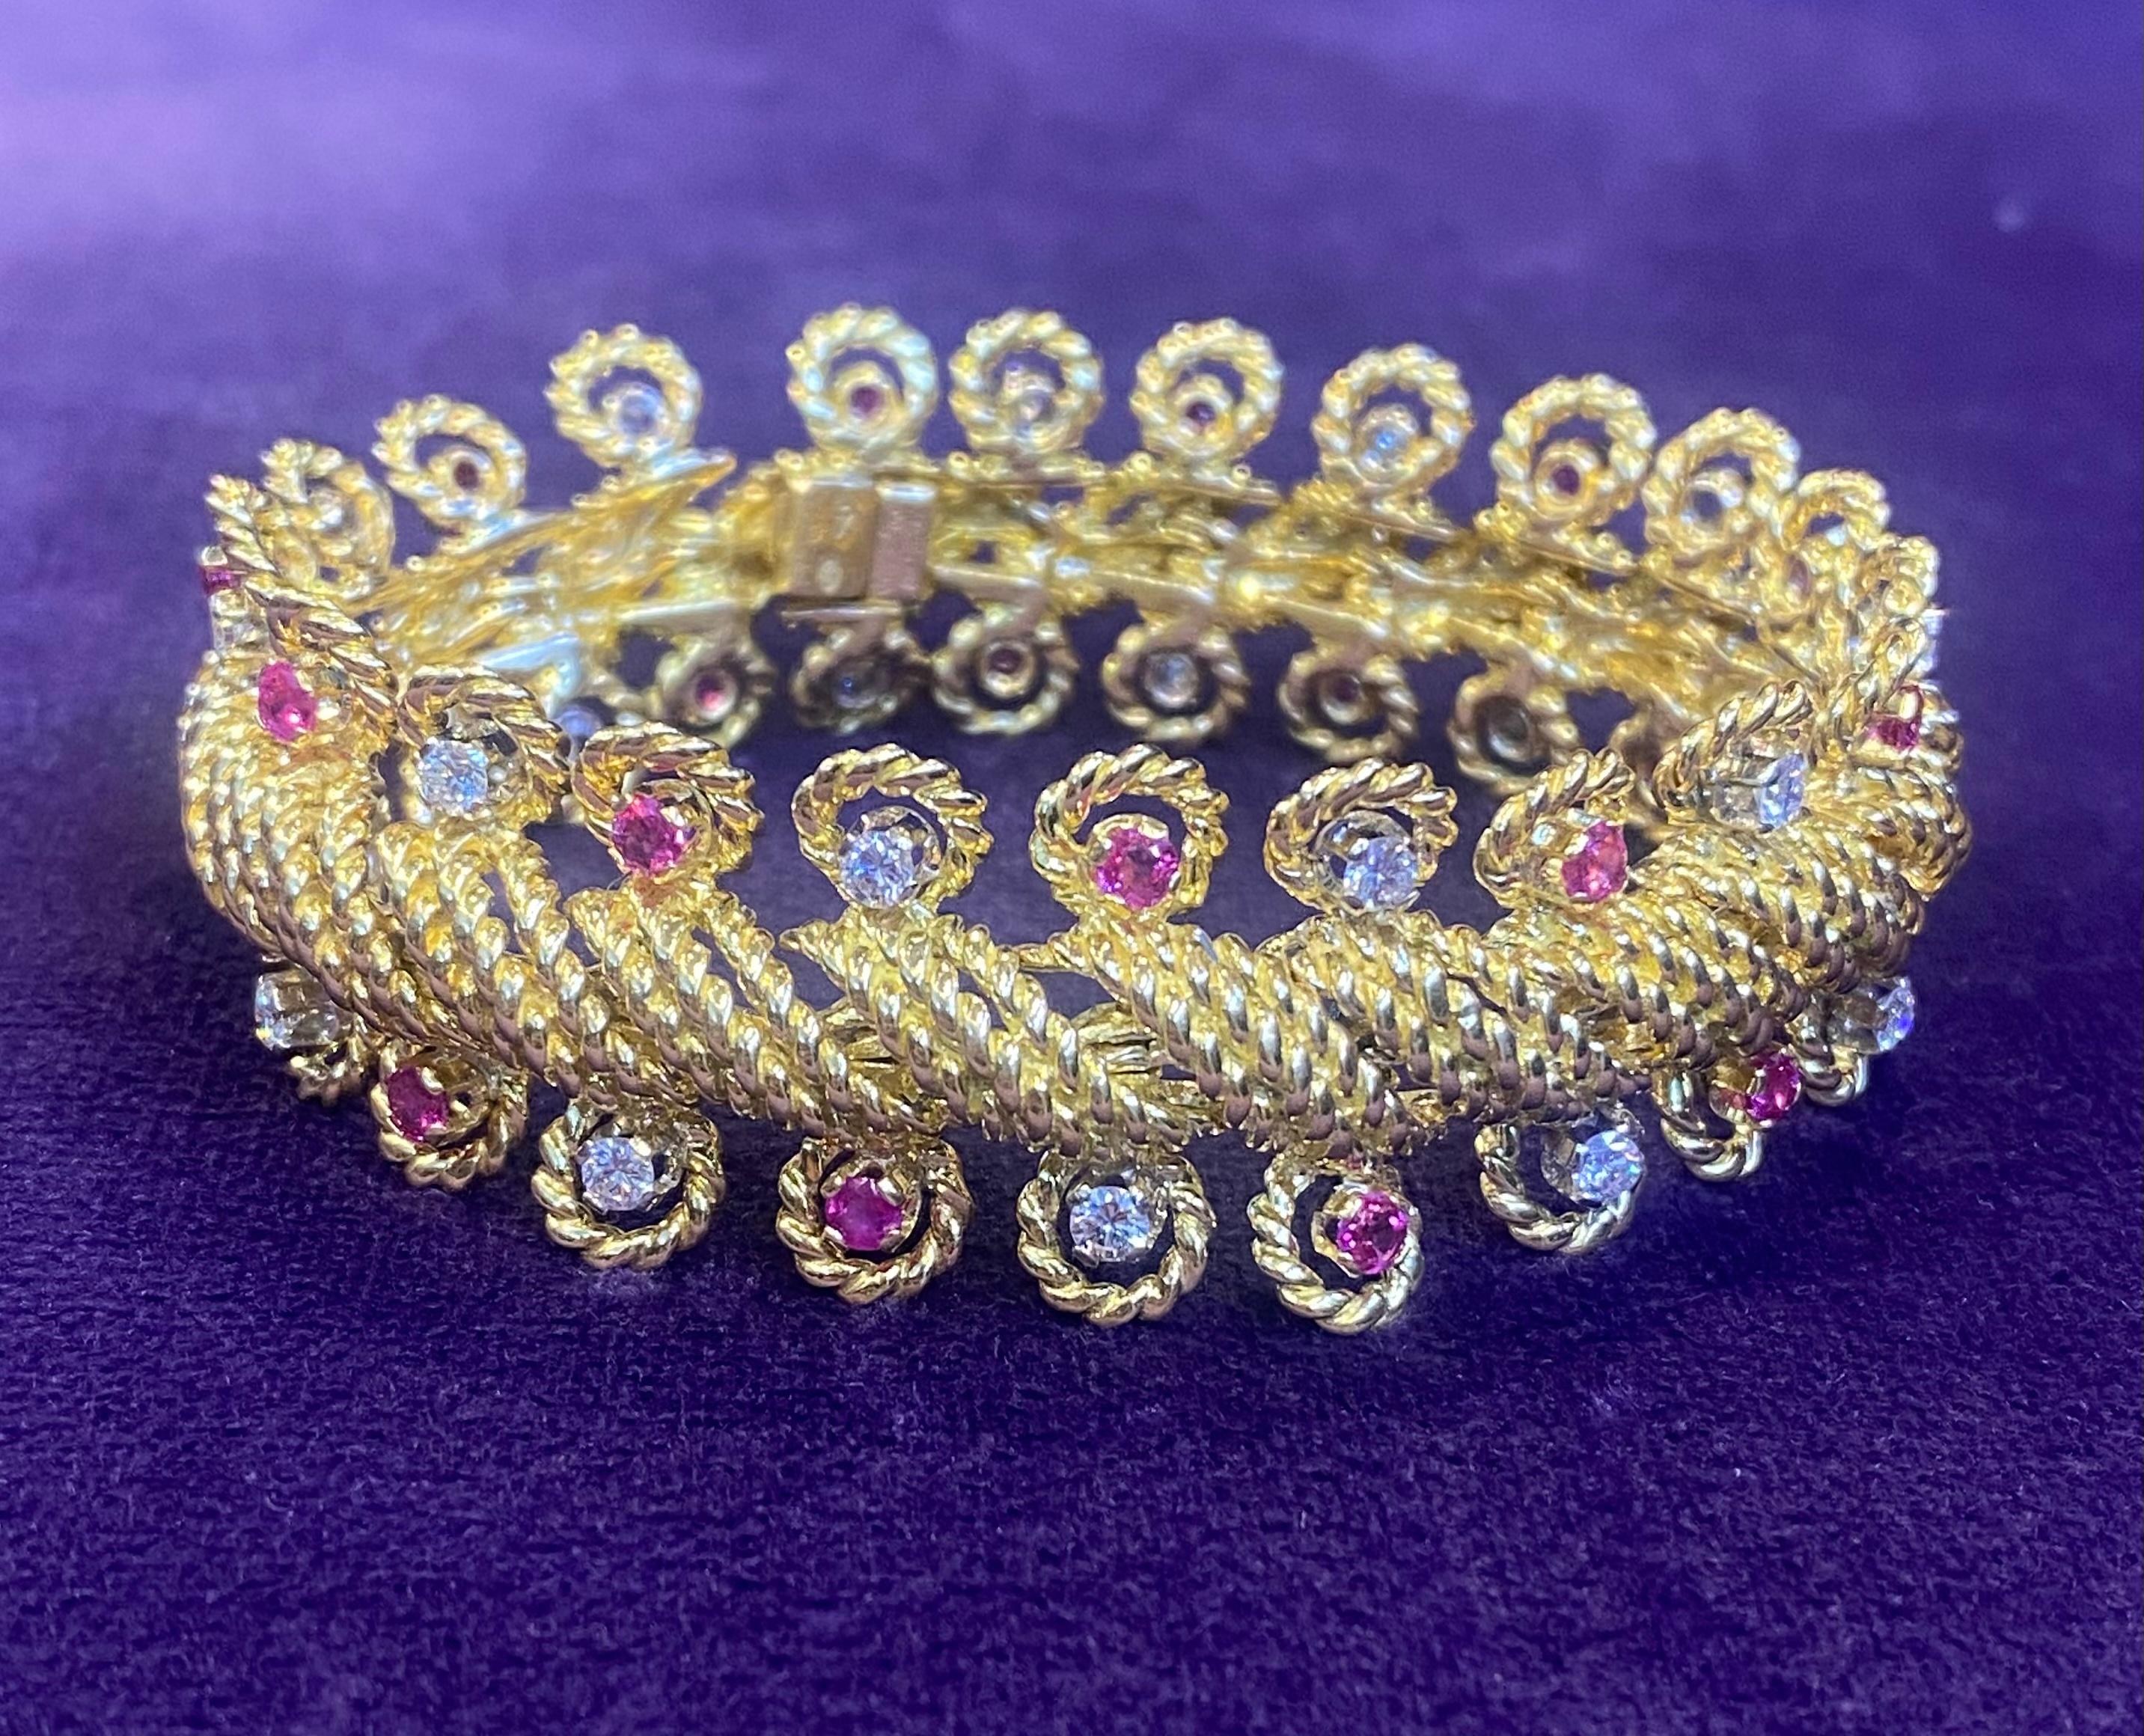 Van Cleef & Arpels Diamond & Ruby Bracelet  In Excellent Condition For Sale In New York, NY